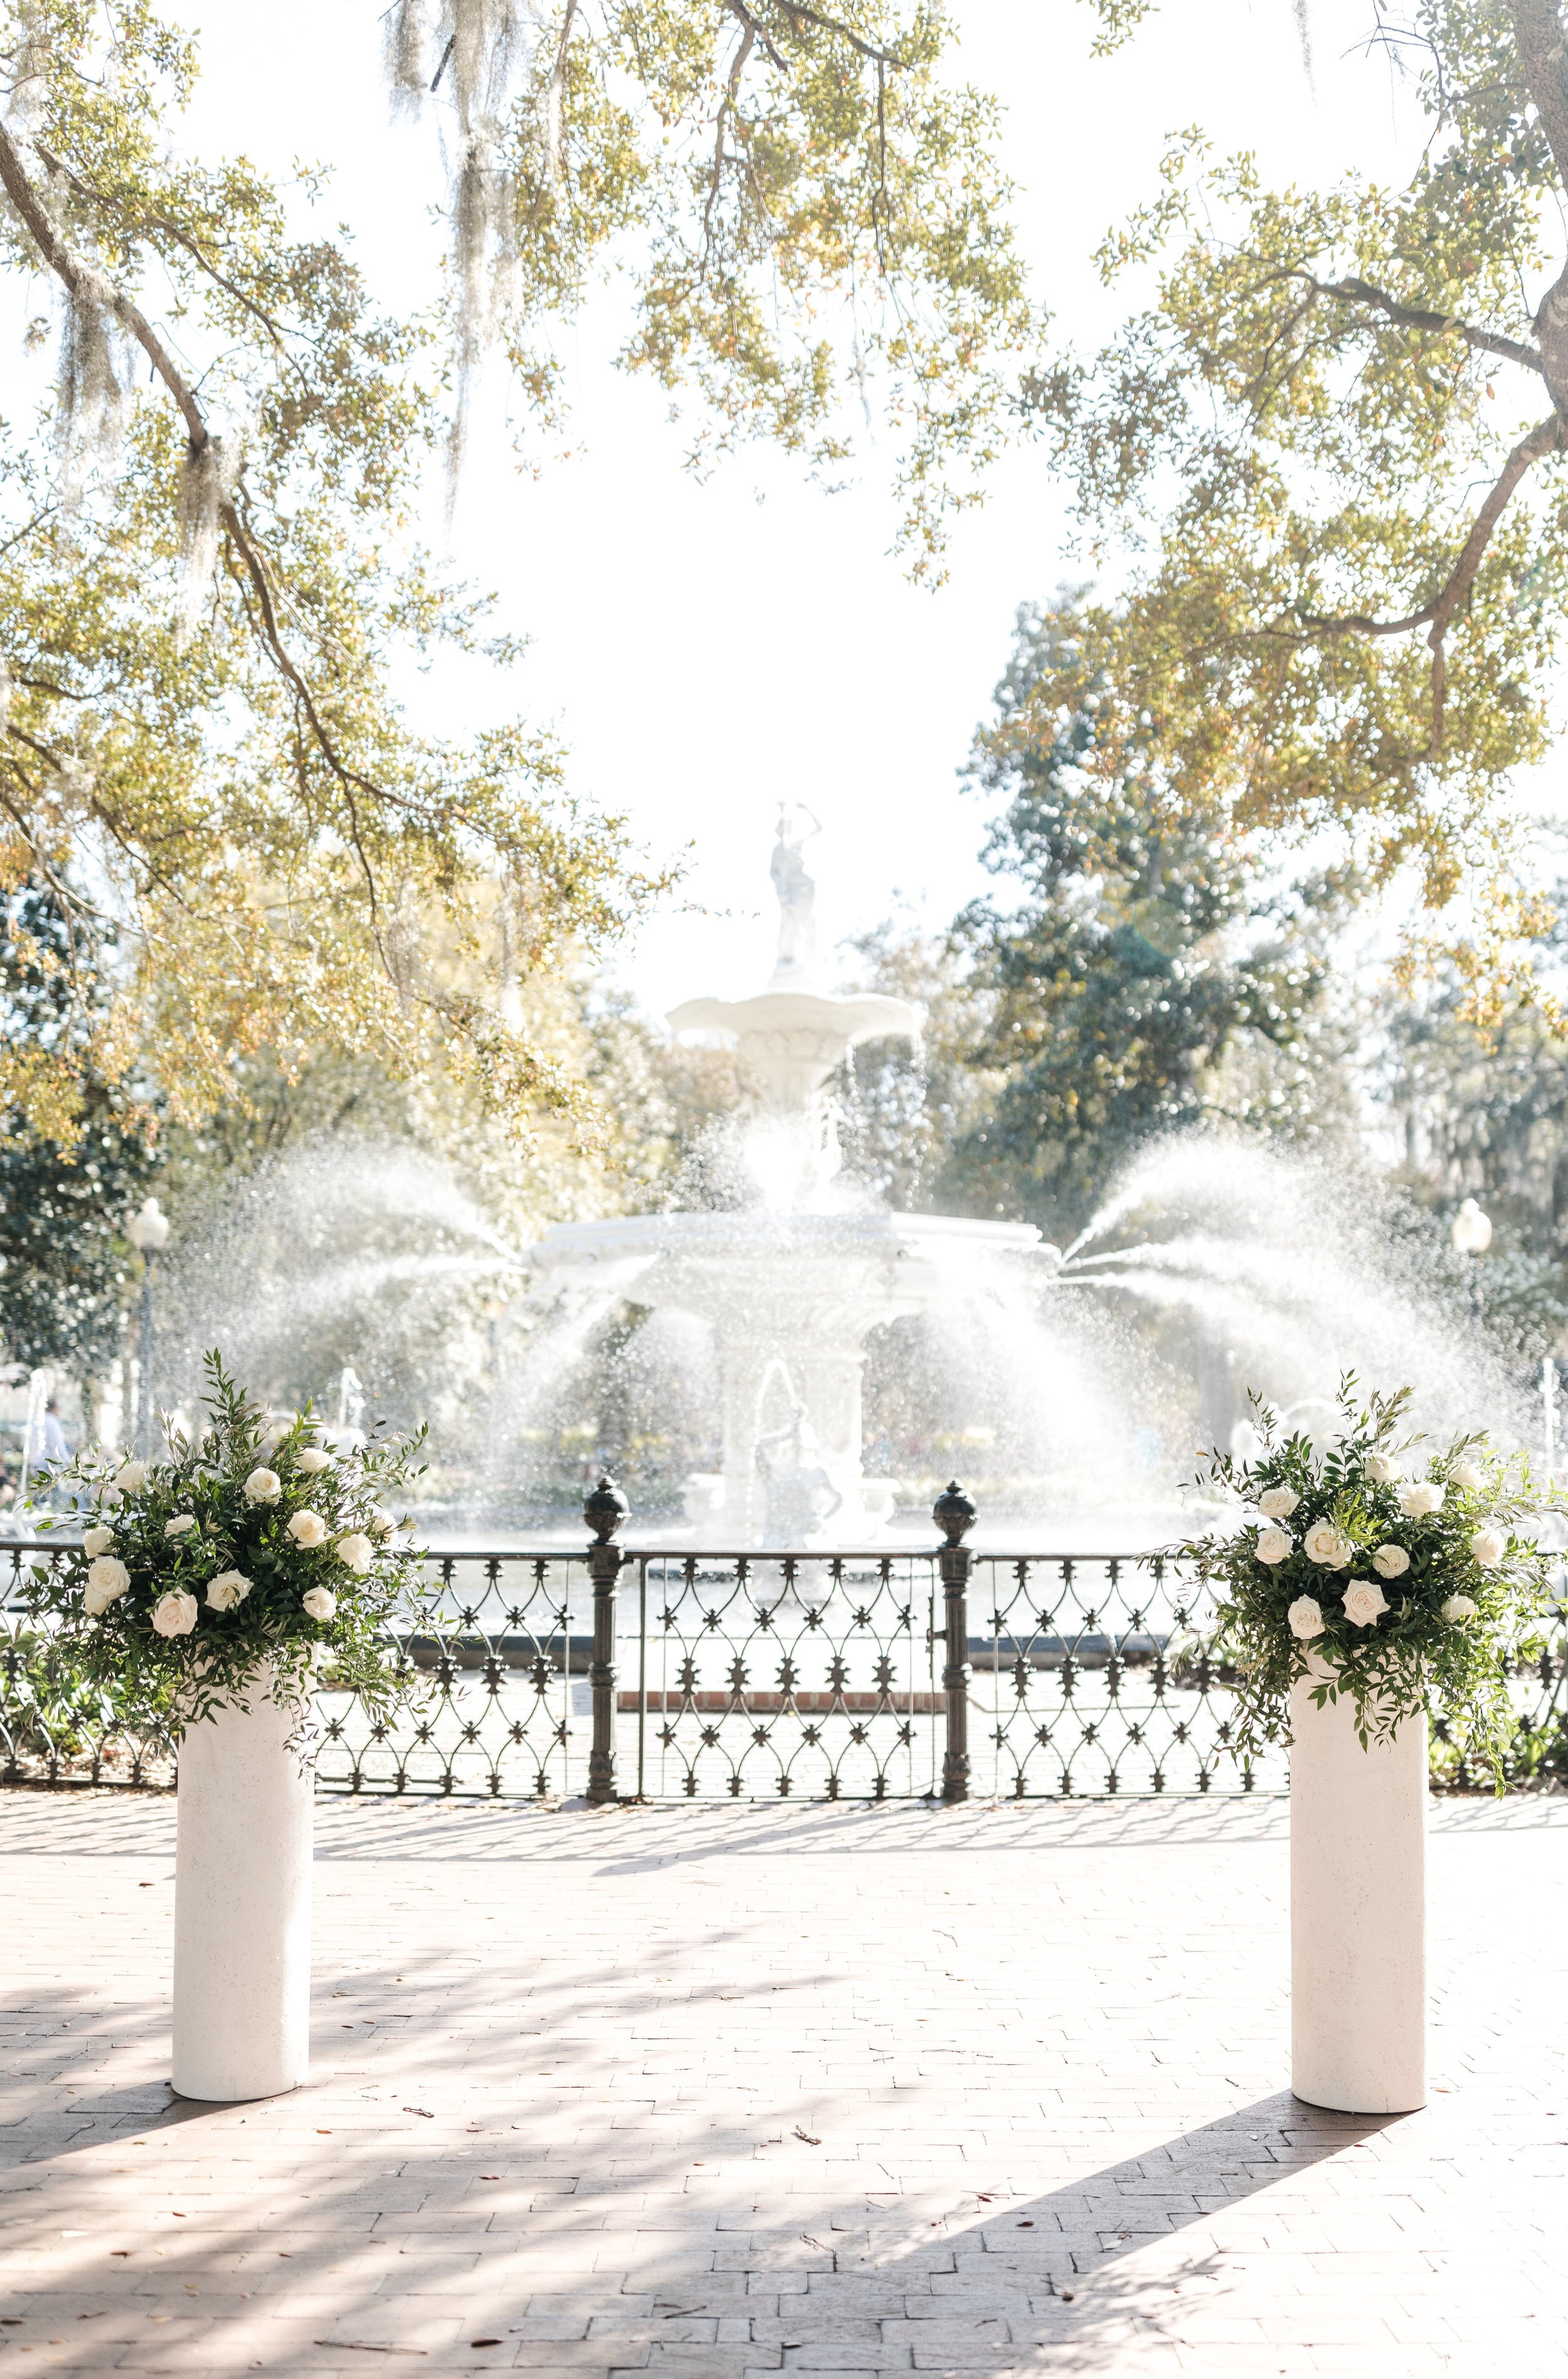 ivory-and-beau-wedding-and-florals-annelise-and-preston-wedding-blog-savannah-wedding-savannah-wedding-coordinator-savannah-florsit-wedding-florist-southern-wedding-forsyth-park-fountain-soho-south-savannah-wedding-gmp20199345-478.jpg